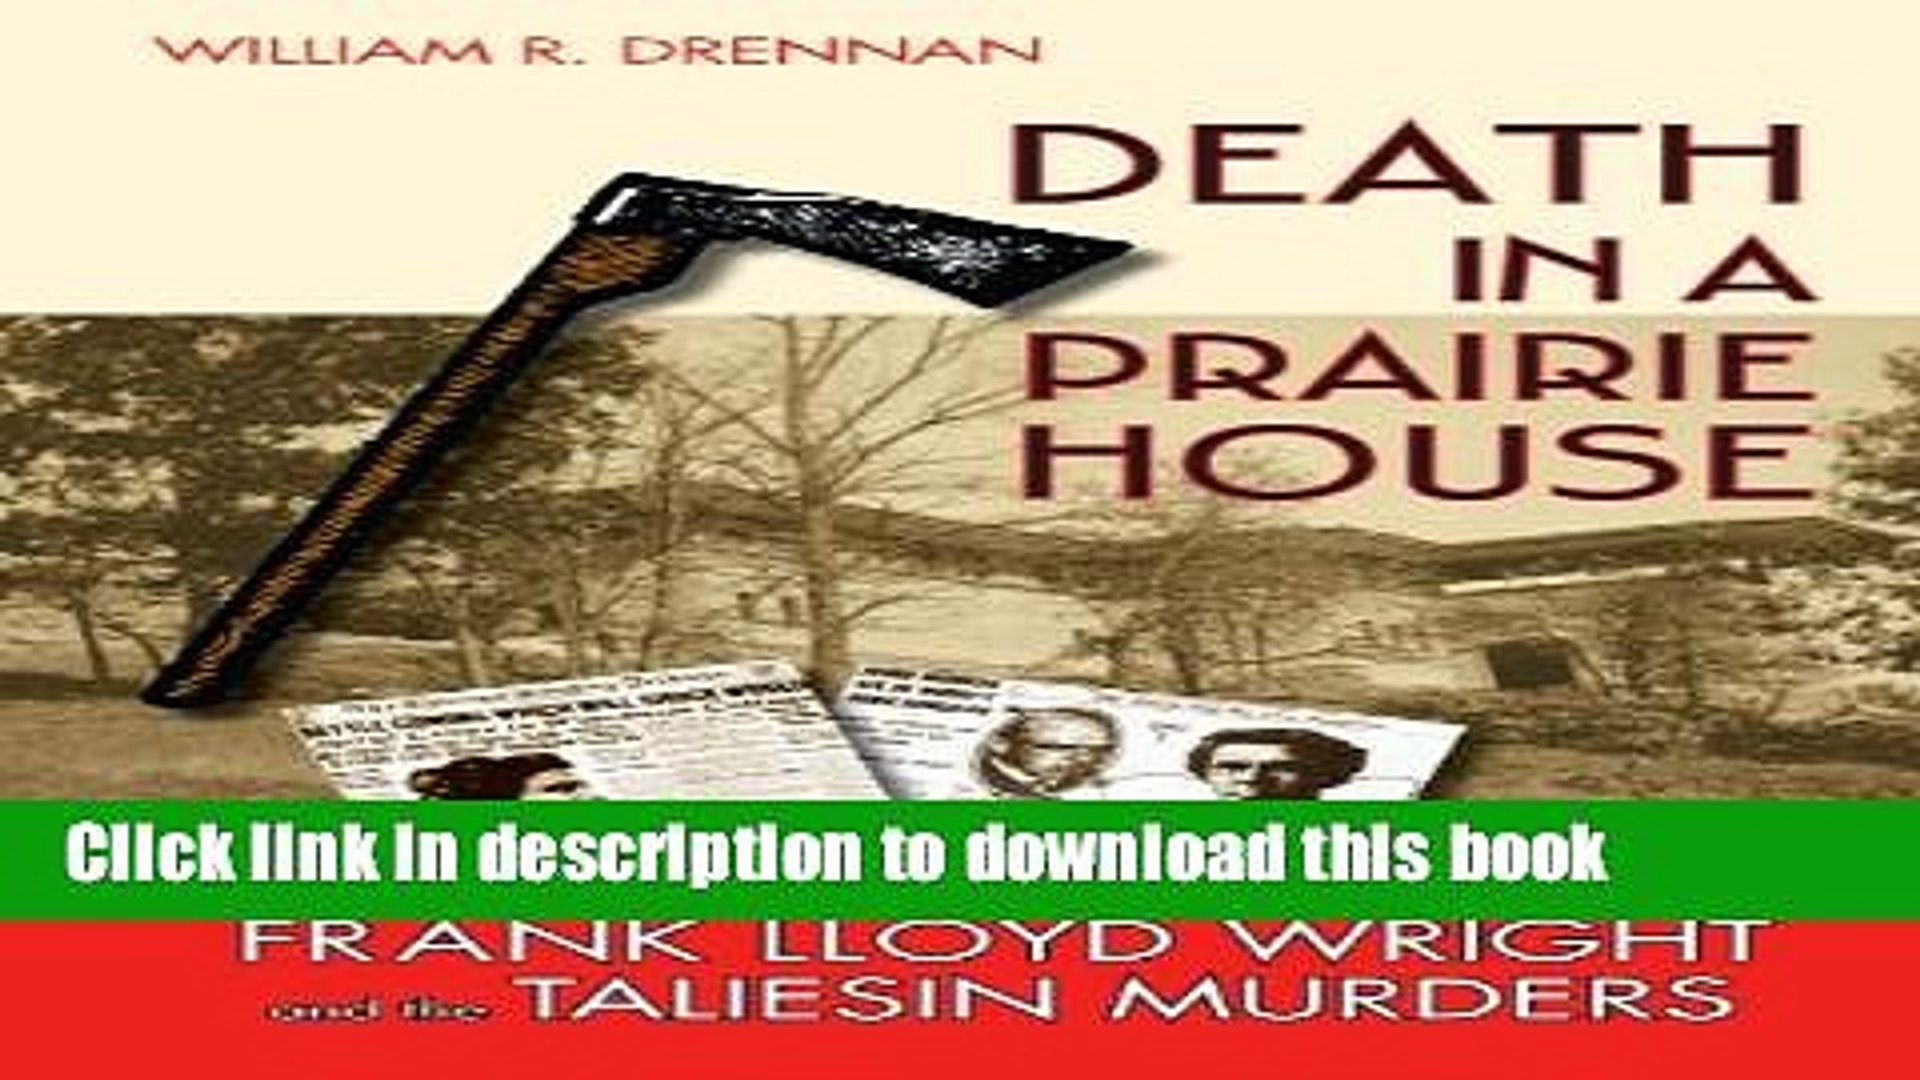 Death in a prairie house pdf free download for windows 7